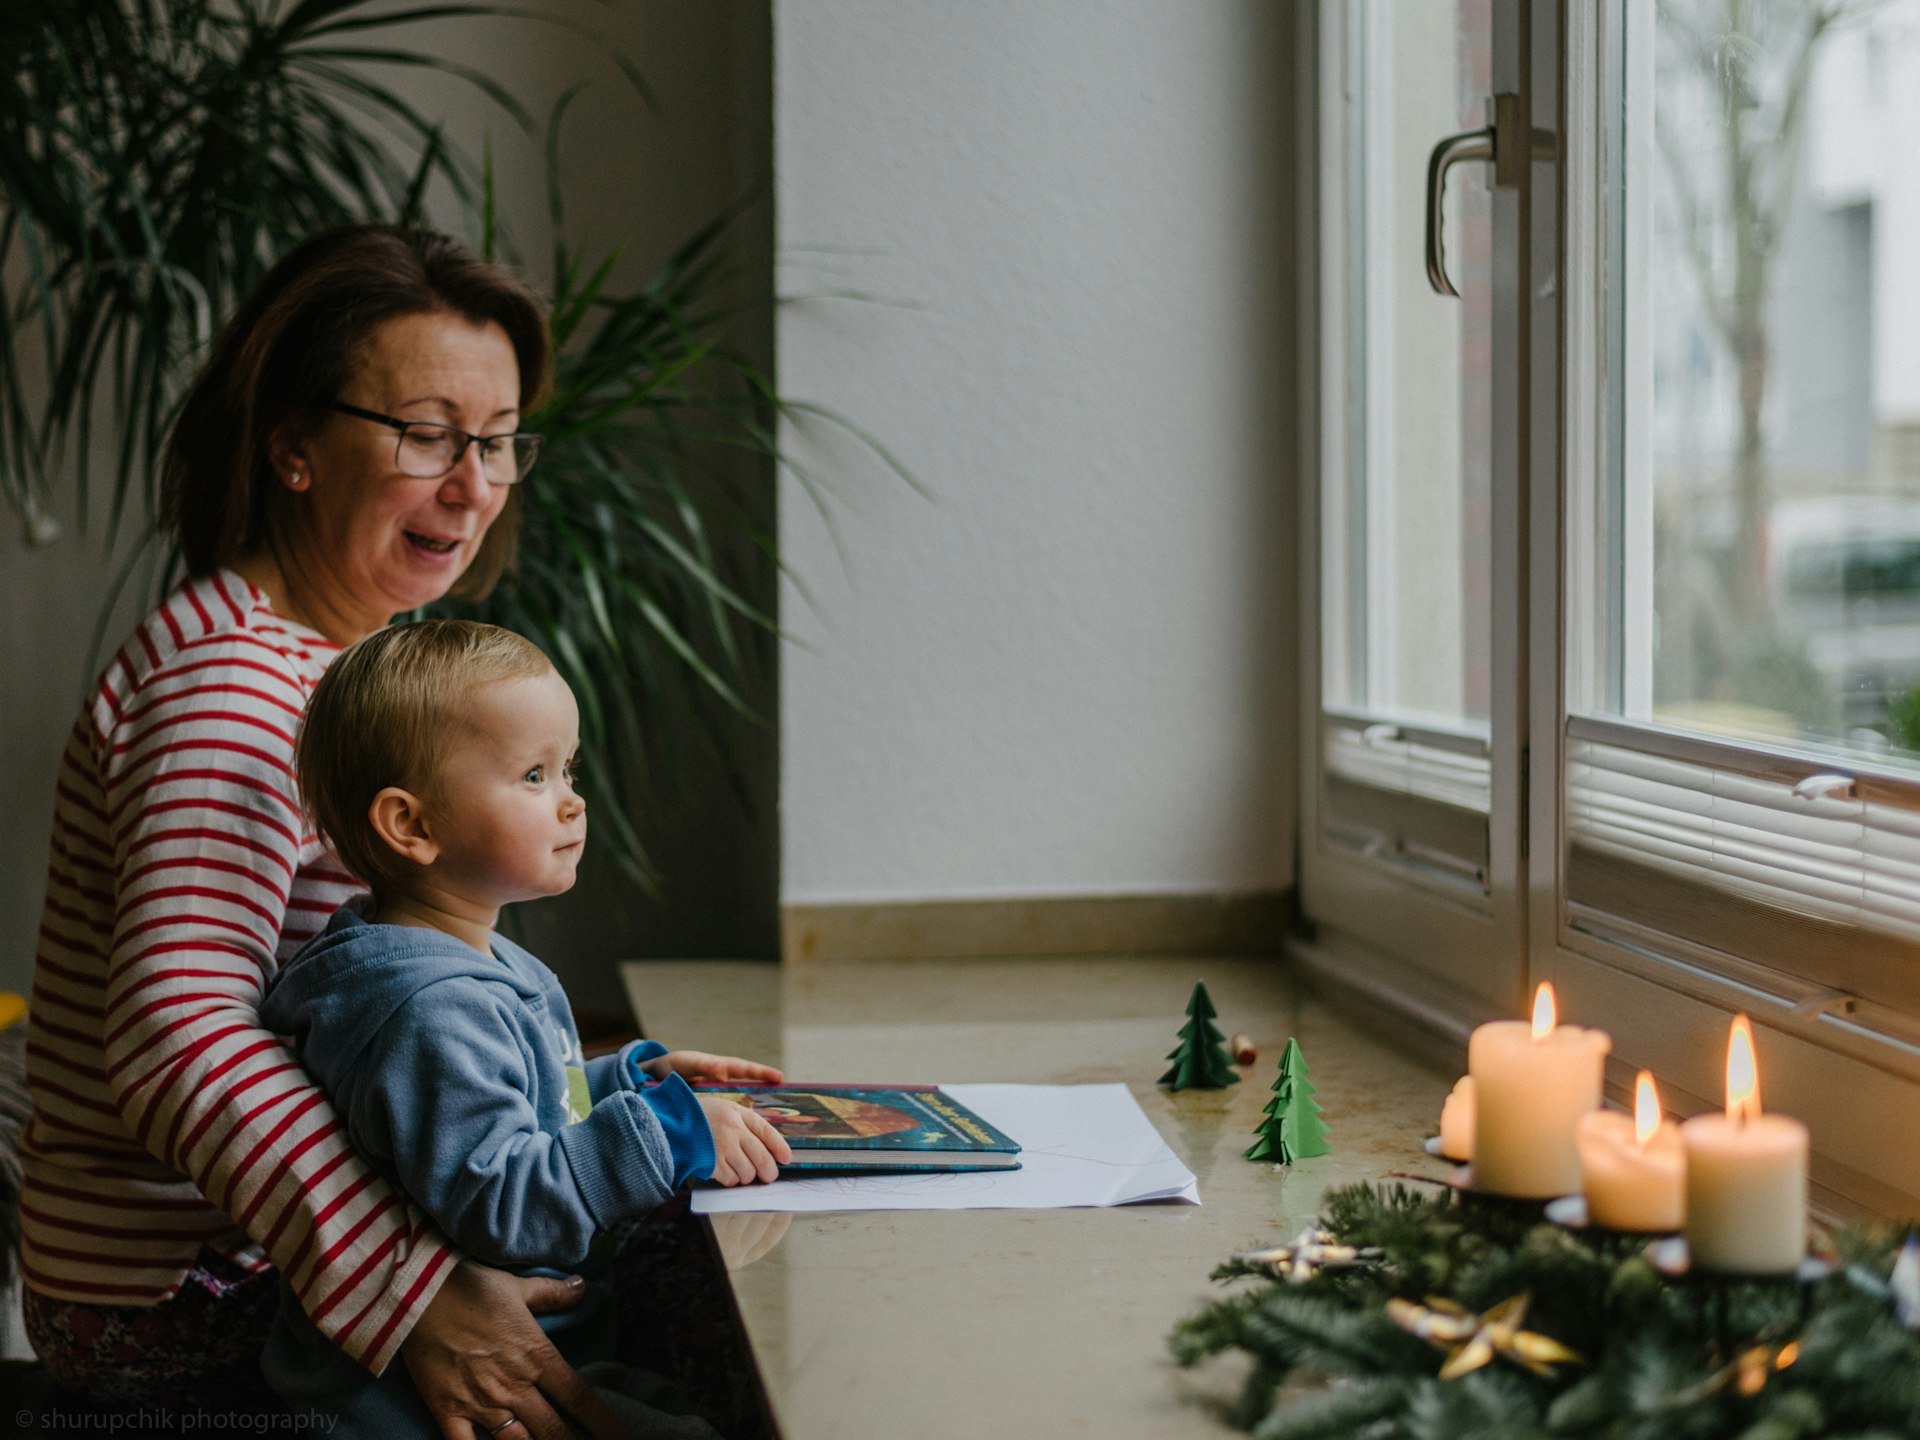 An older woman holds a toddler who looks out a window while holding a book. In the foreground is an advent wreath and paper Christmas trees